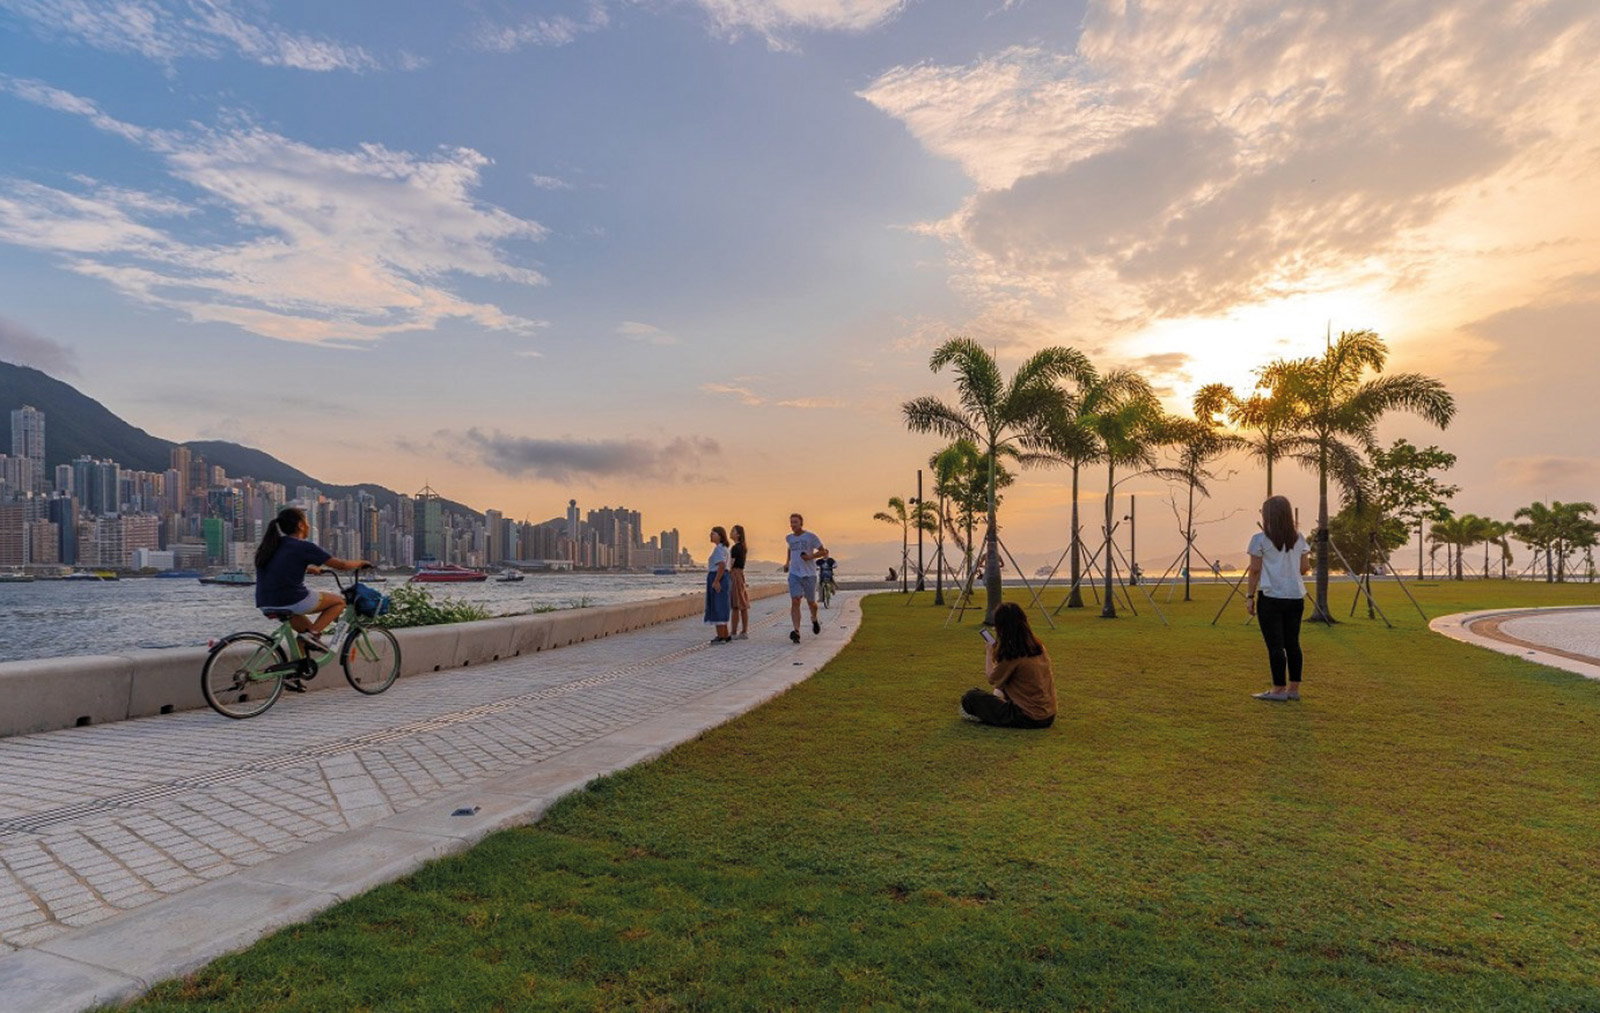 People bike and hang out at Art Park along the West Kowloon harbourfront in Hong Kong